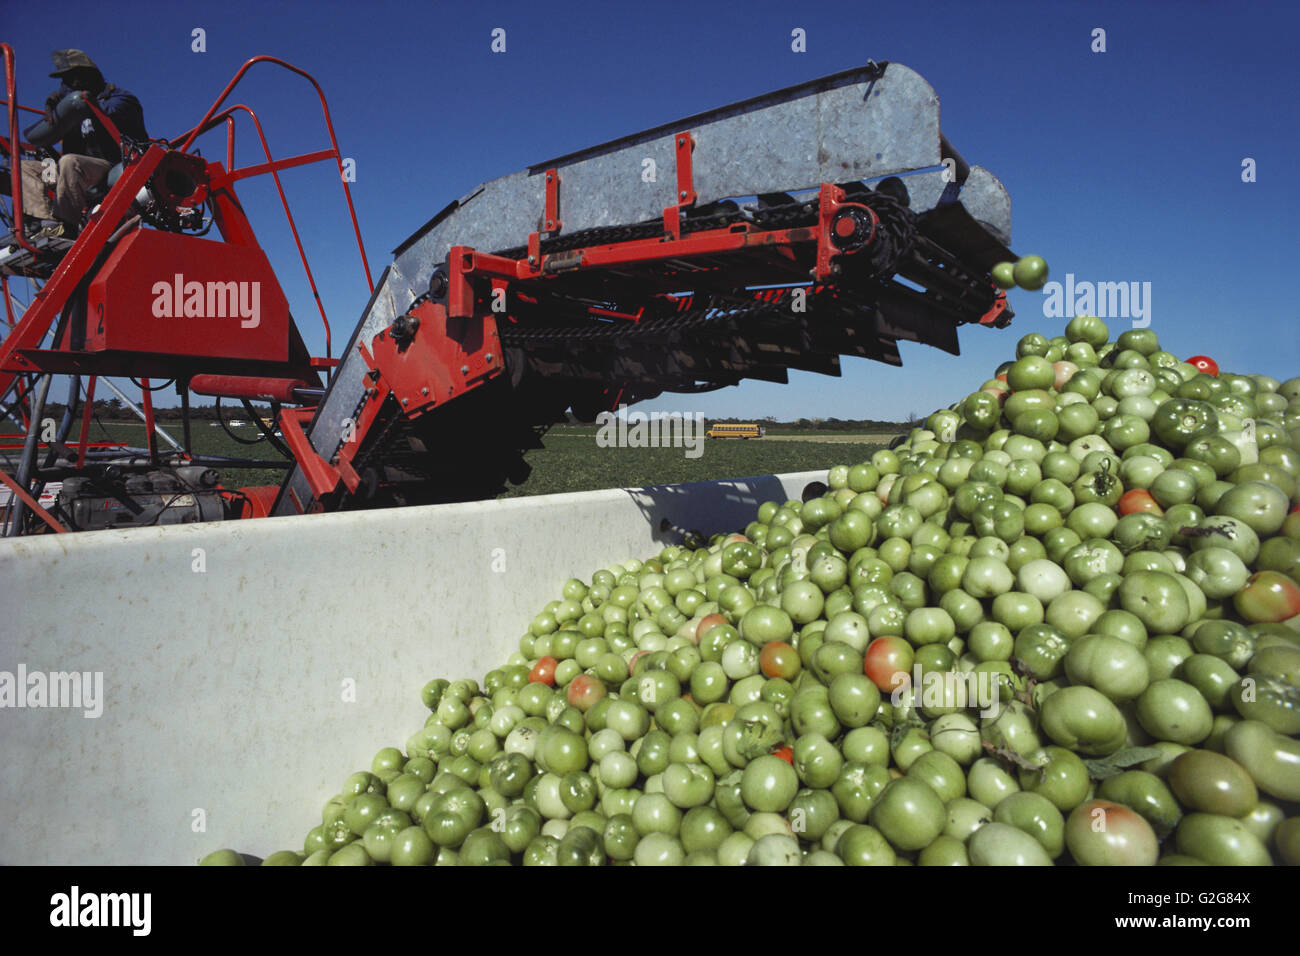 Man harvesting tomatoes in Dade county, Florida, USA. Stock Photo